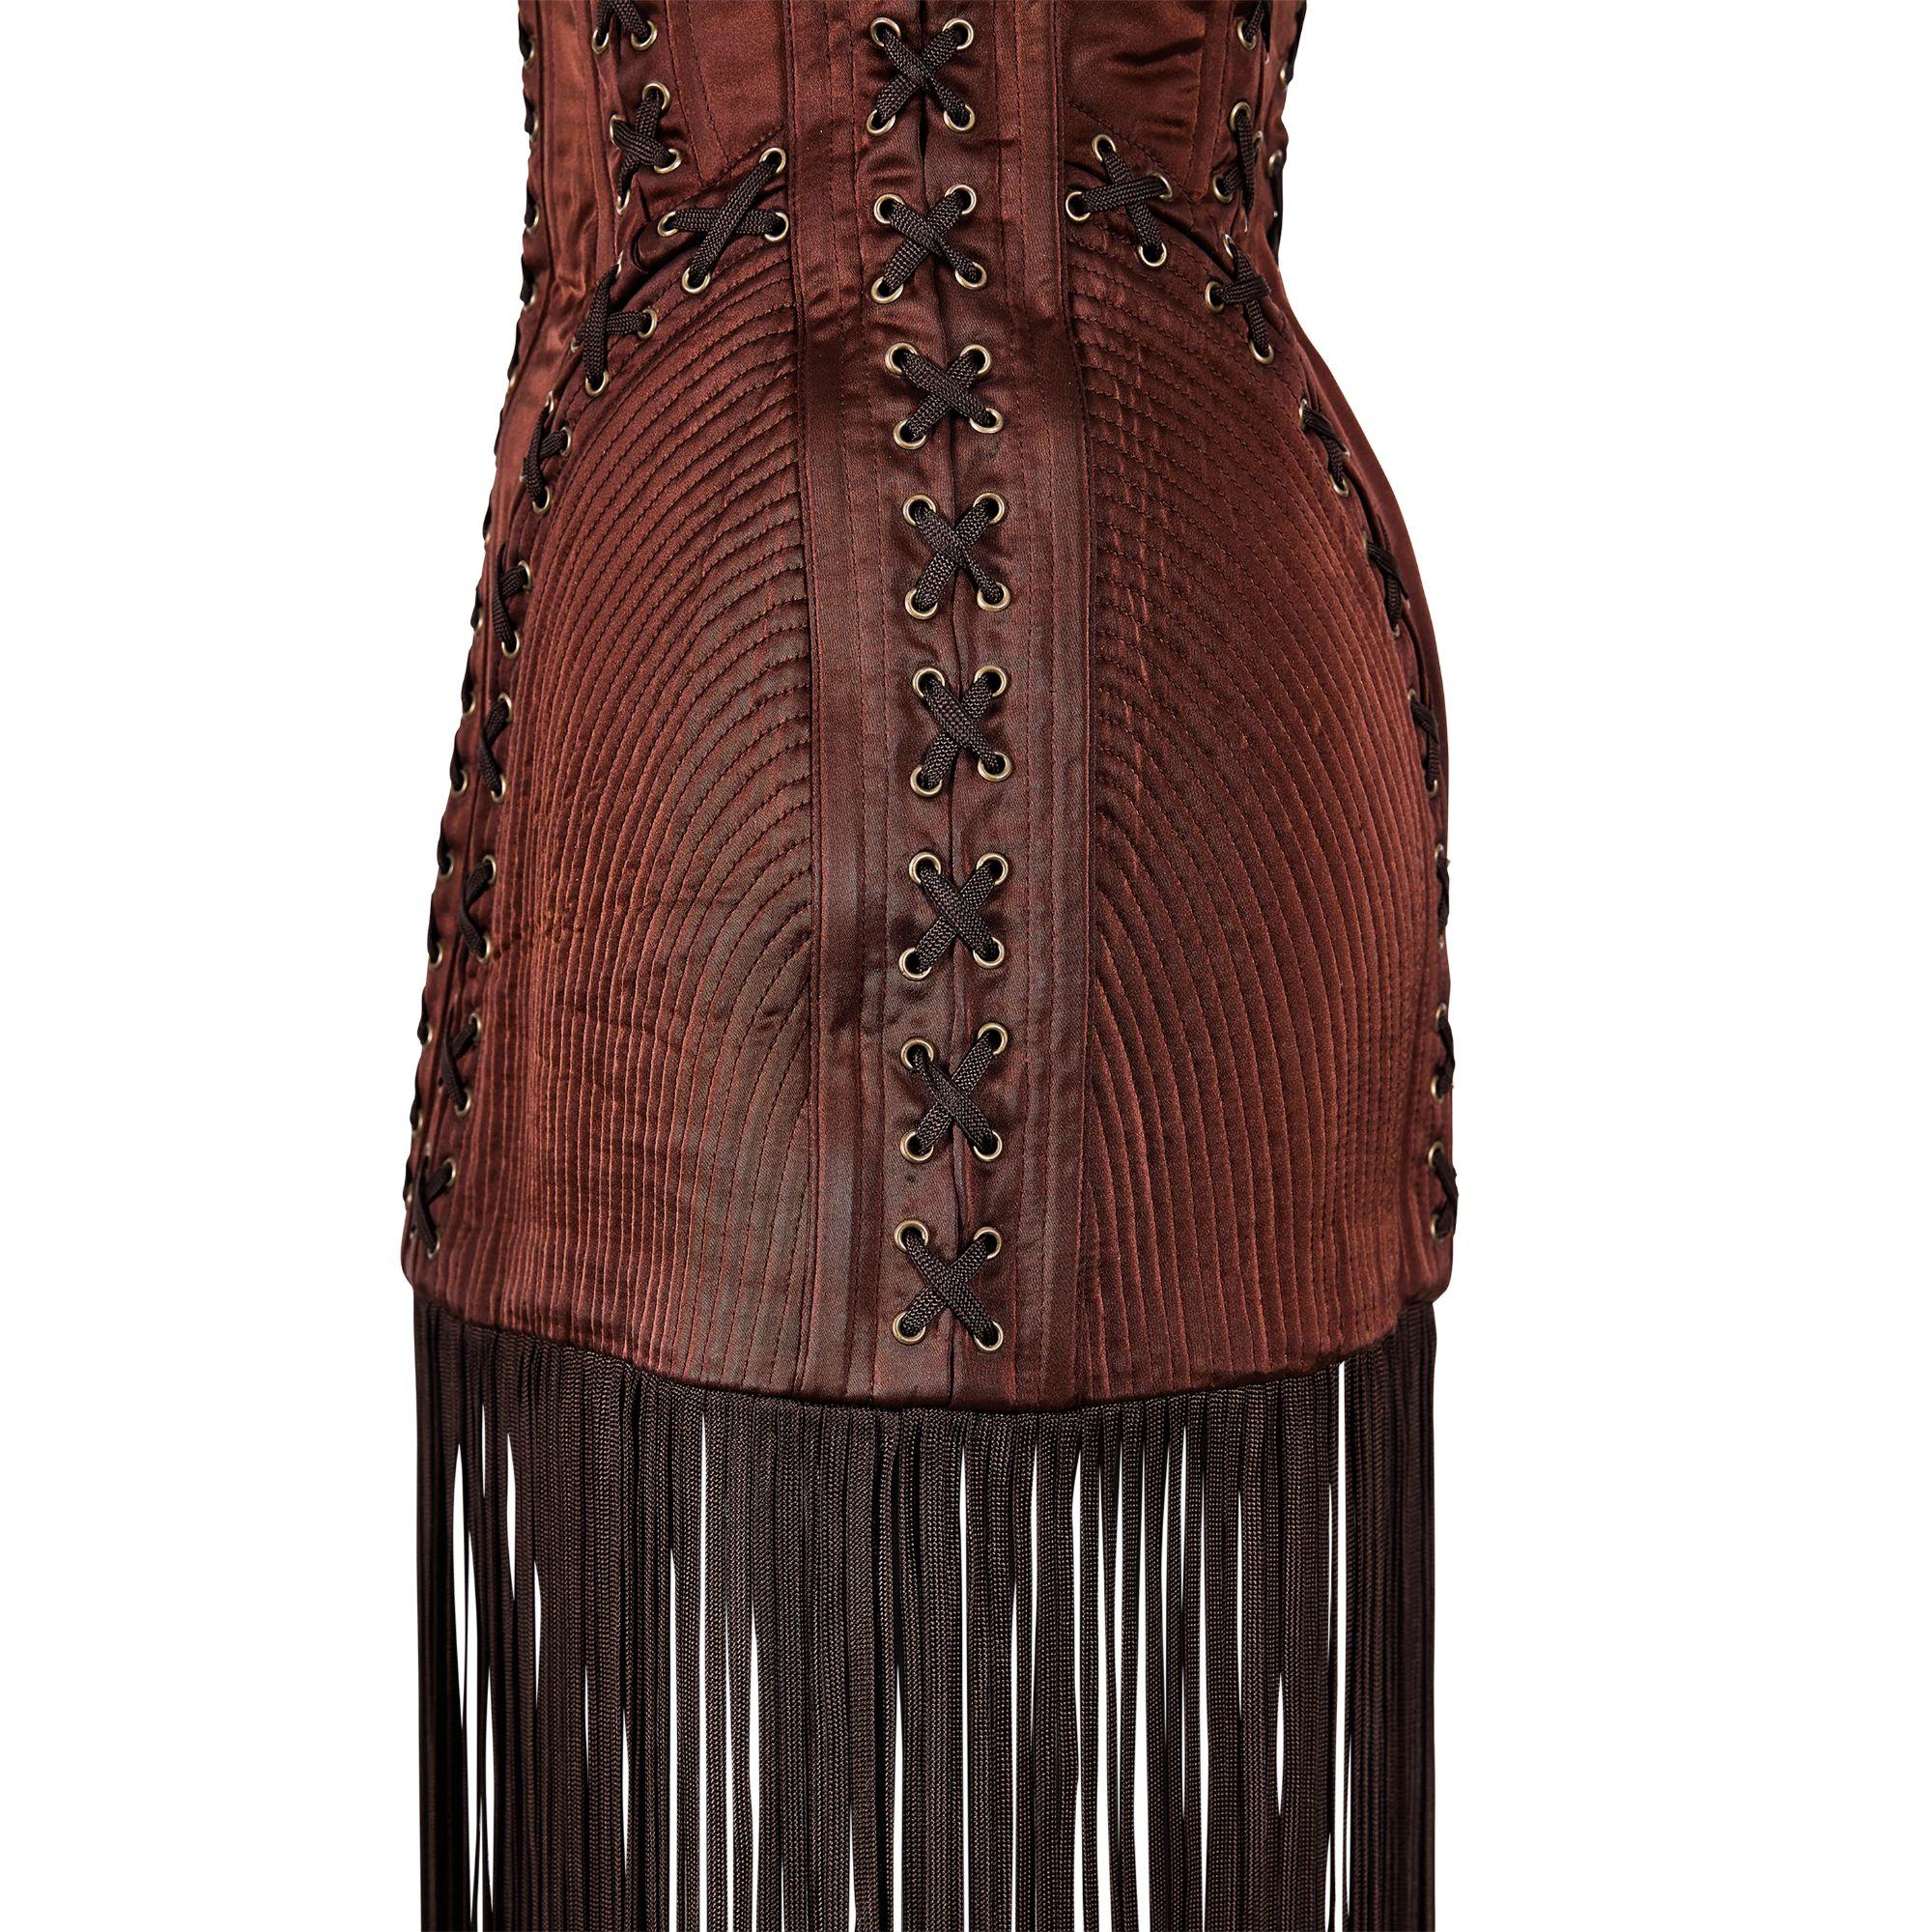 A/W 1990 Jean Paul Gaultier Brown Cone Bra Corset Dress with Shoestring Fringe 2